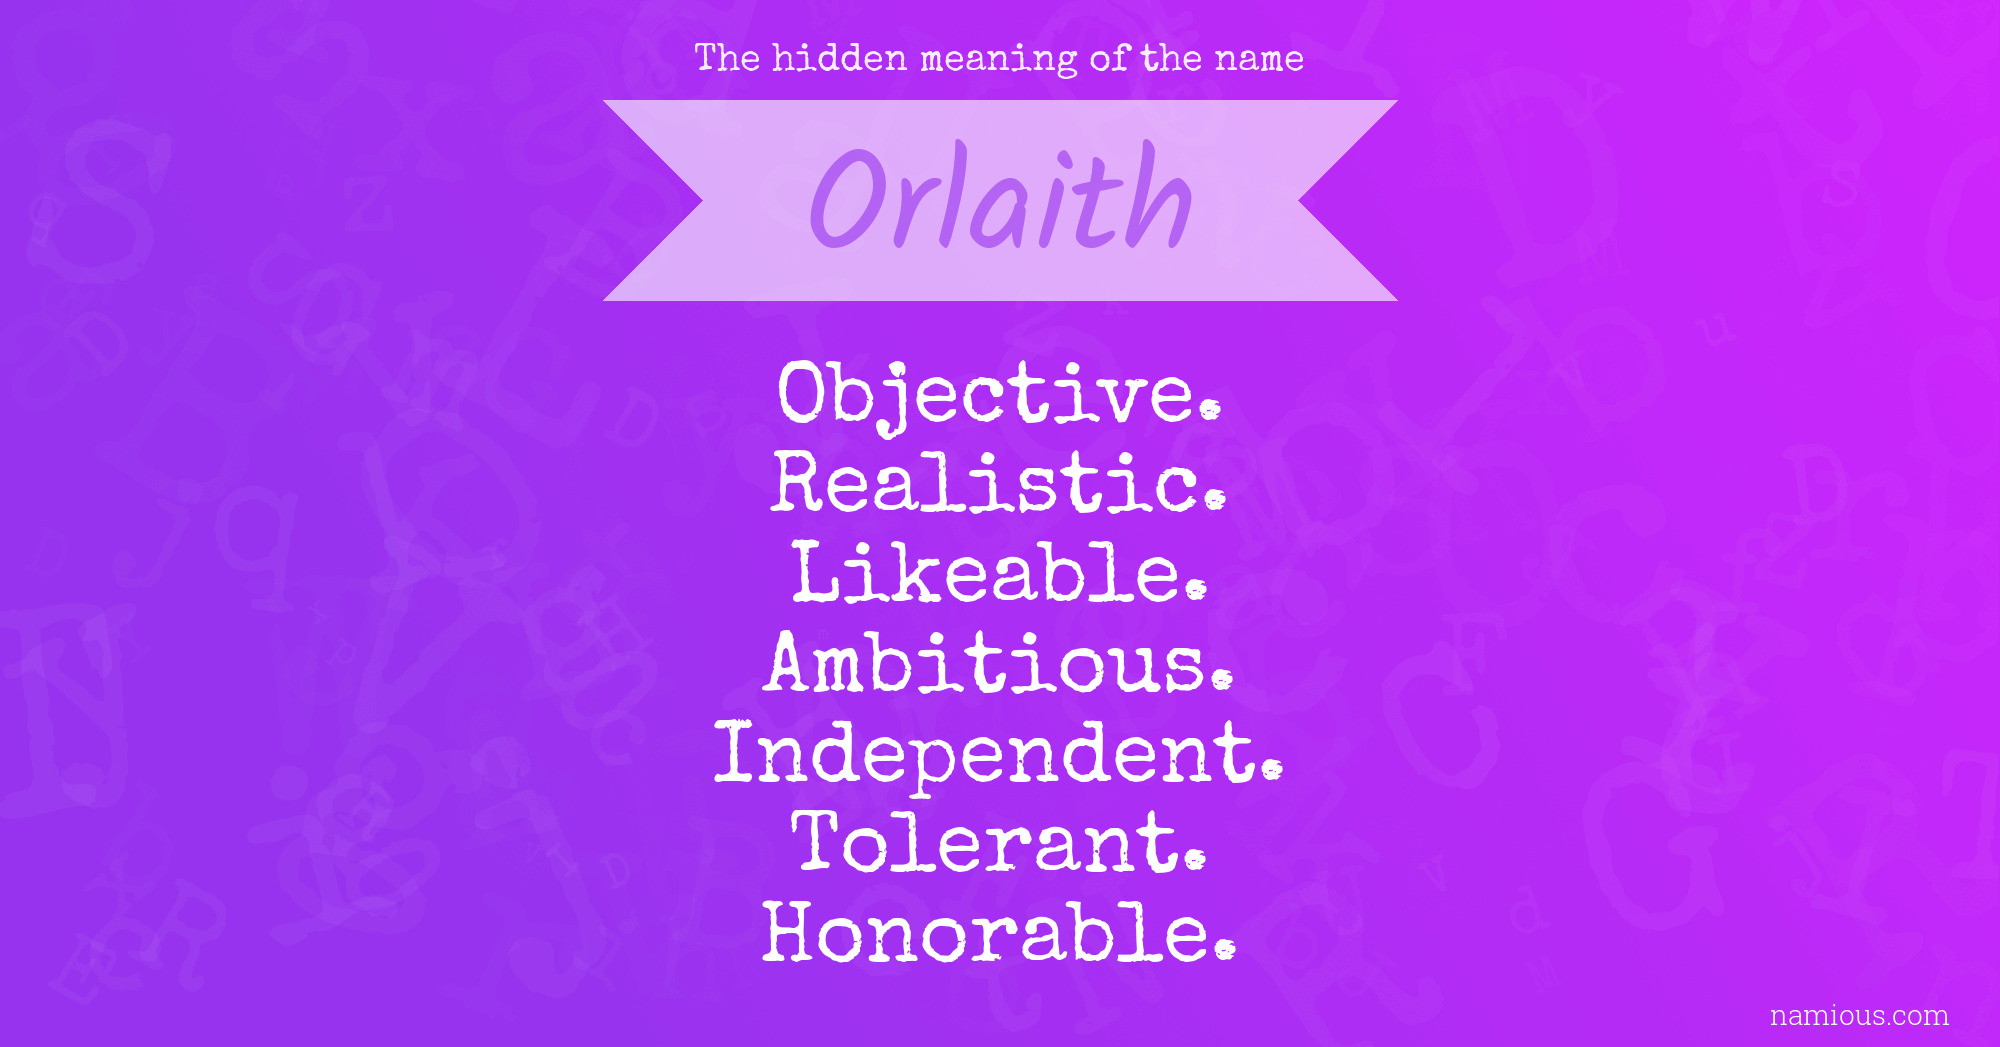 The hidden meaning of the name Orlaith